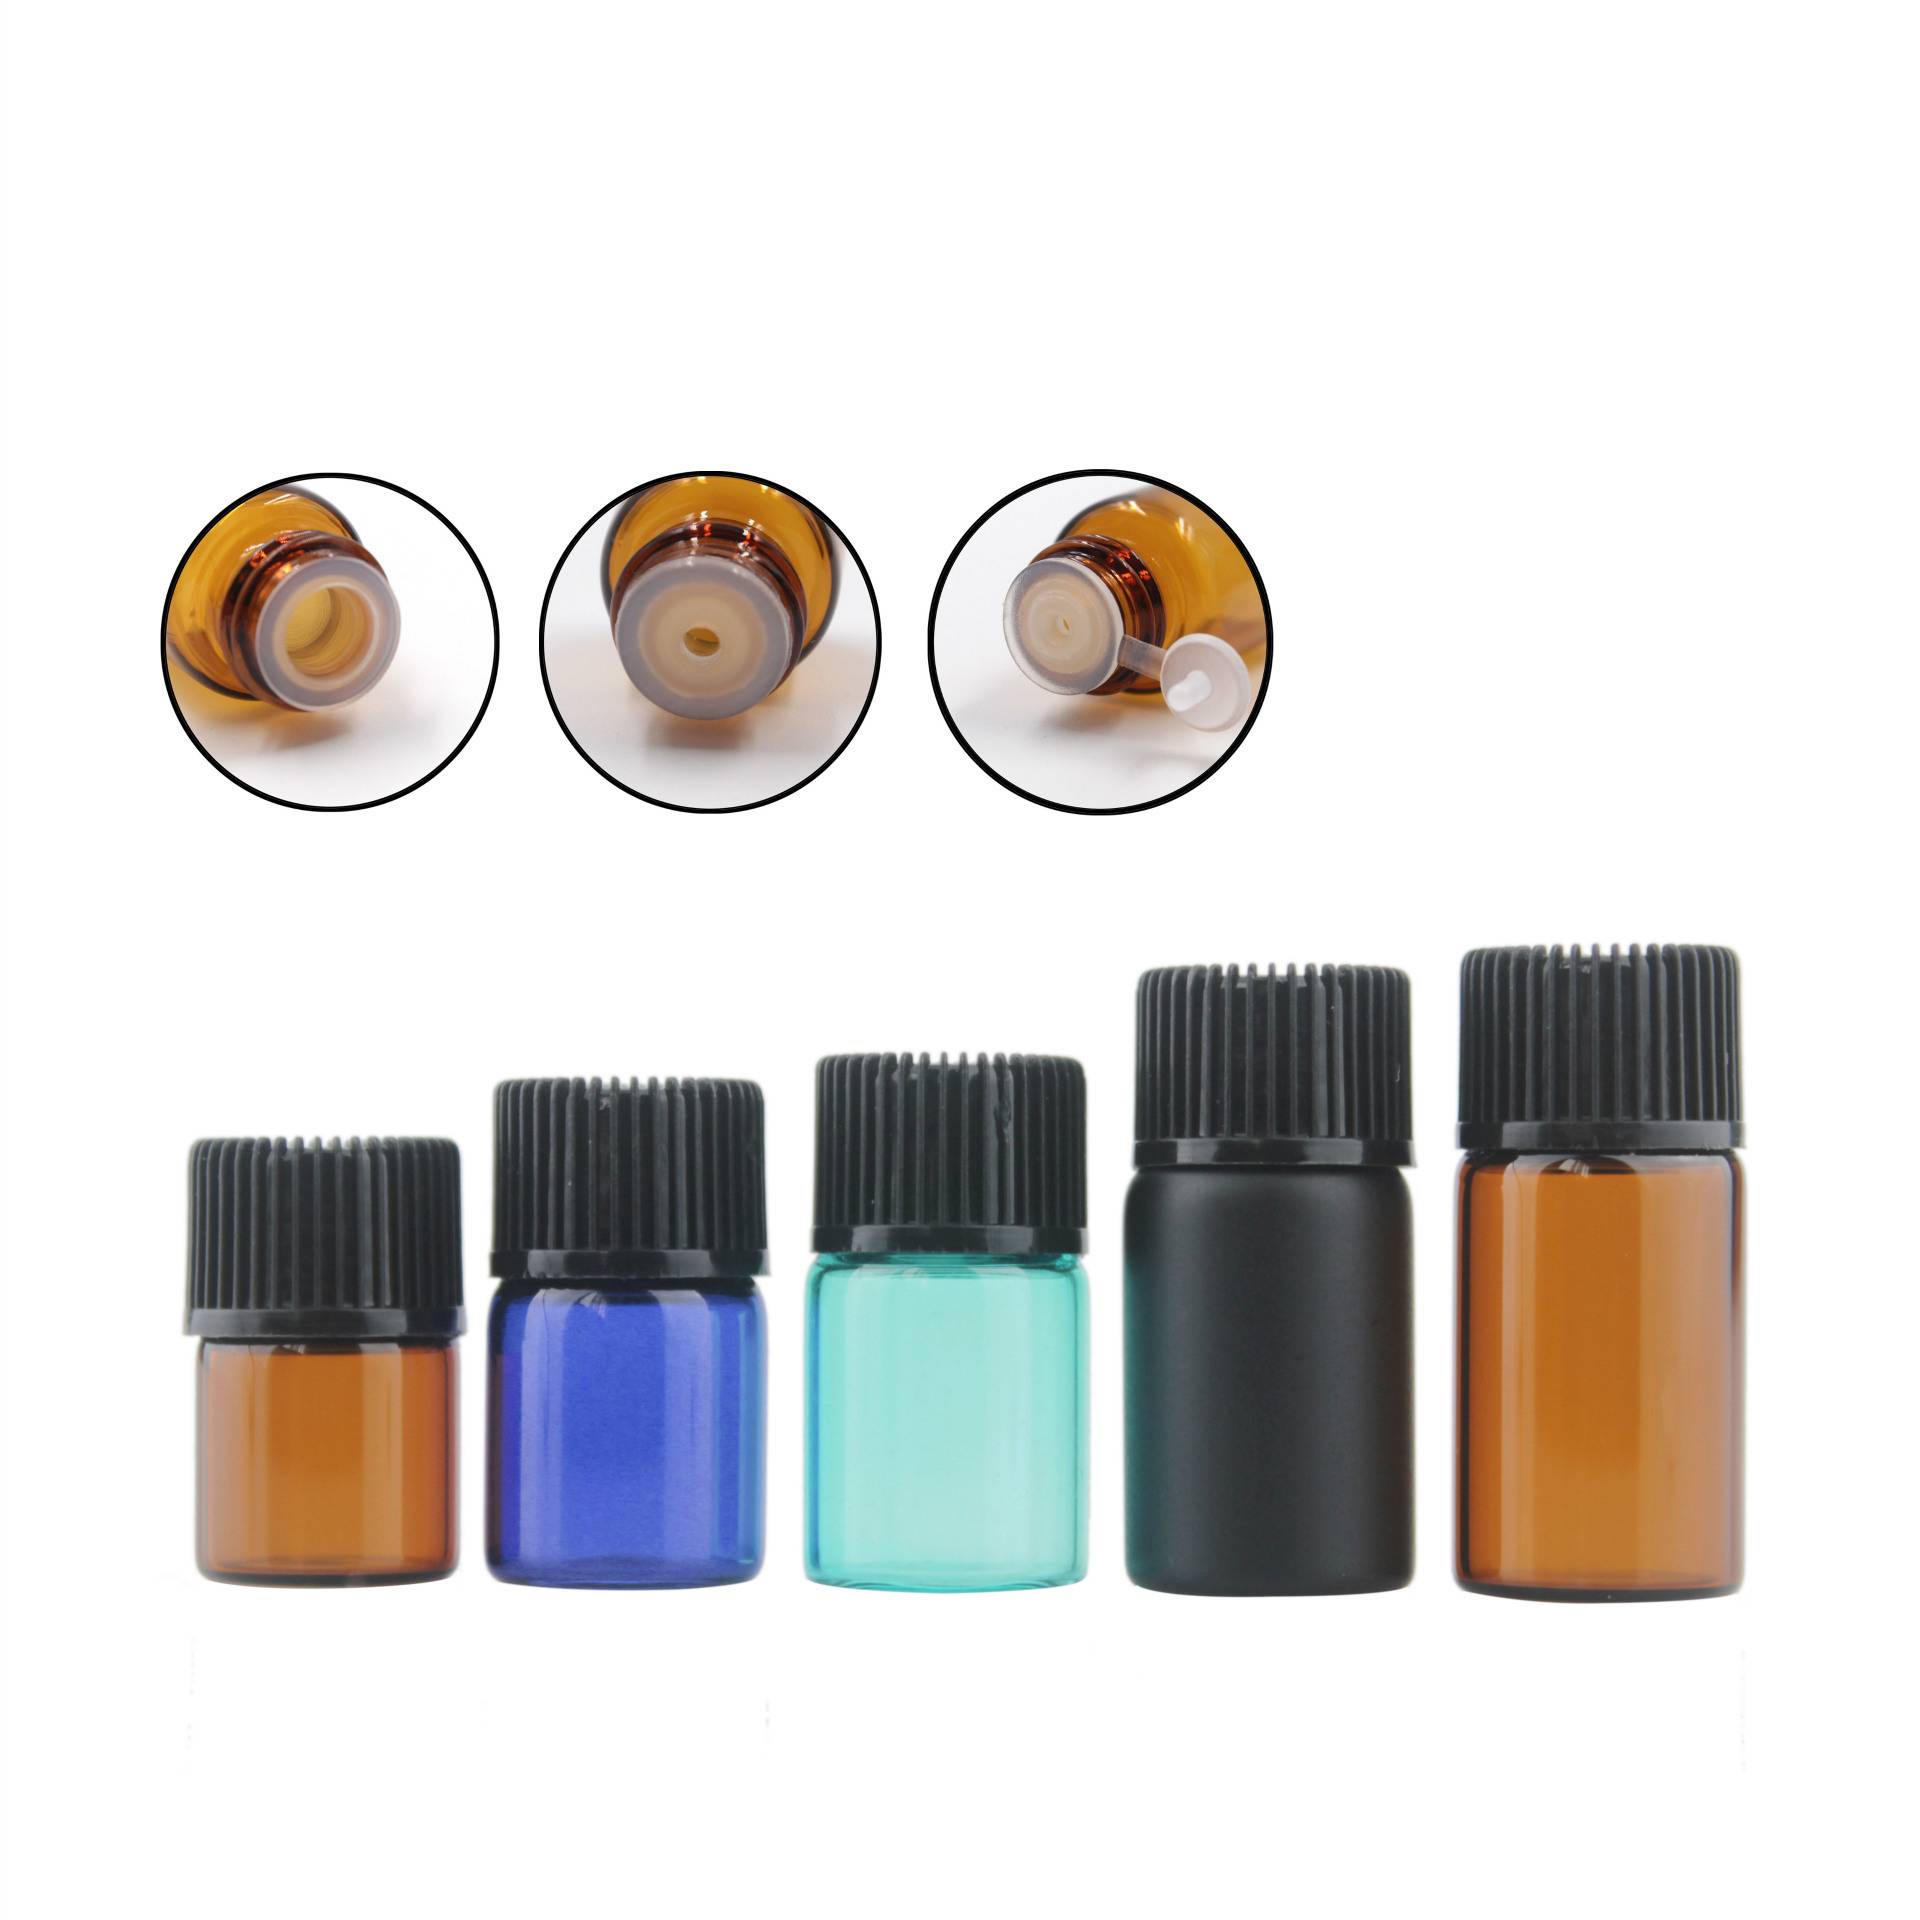 1ml 2ml 3ml  small mini sample glass vials with screw cap and with painted colors Featured Image